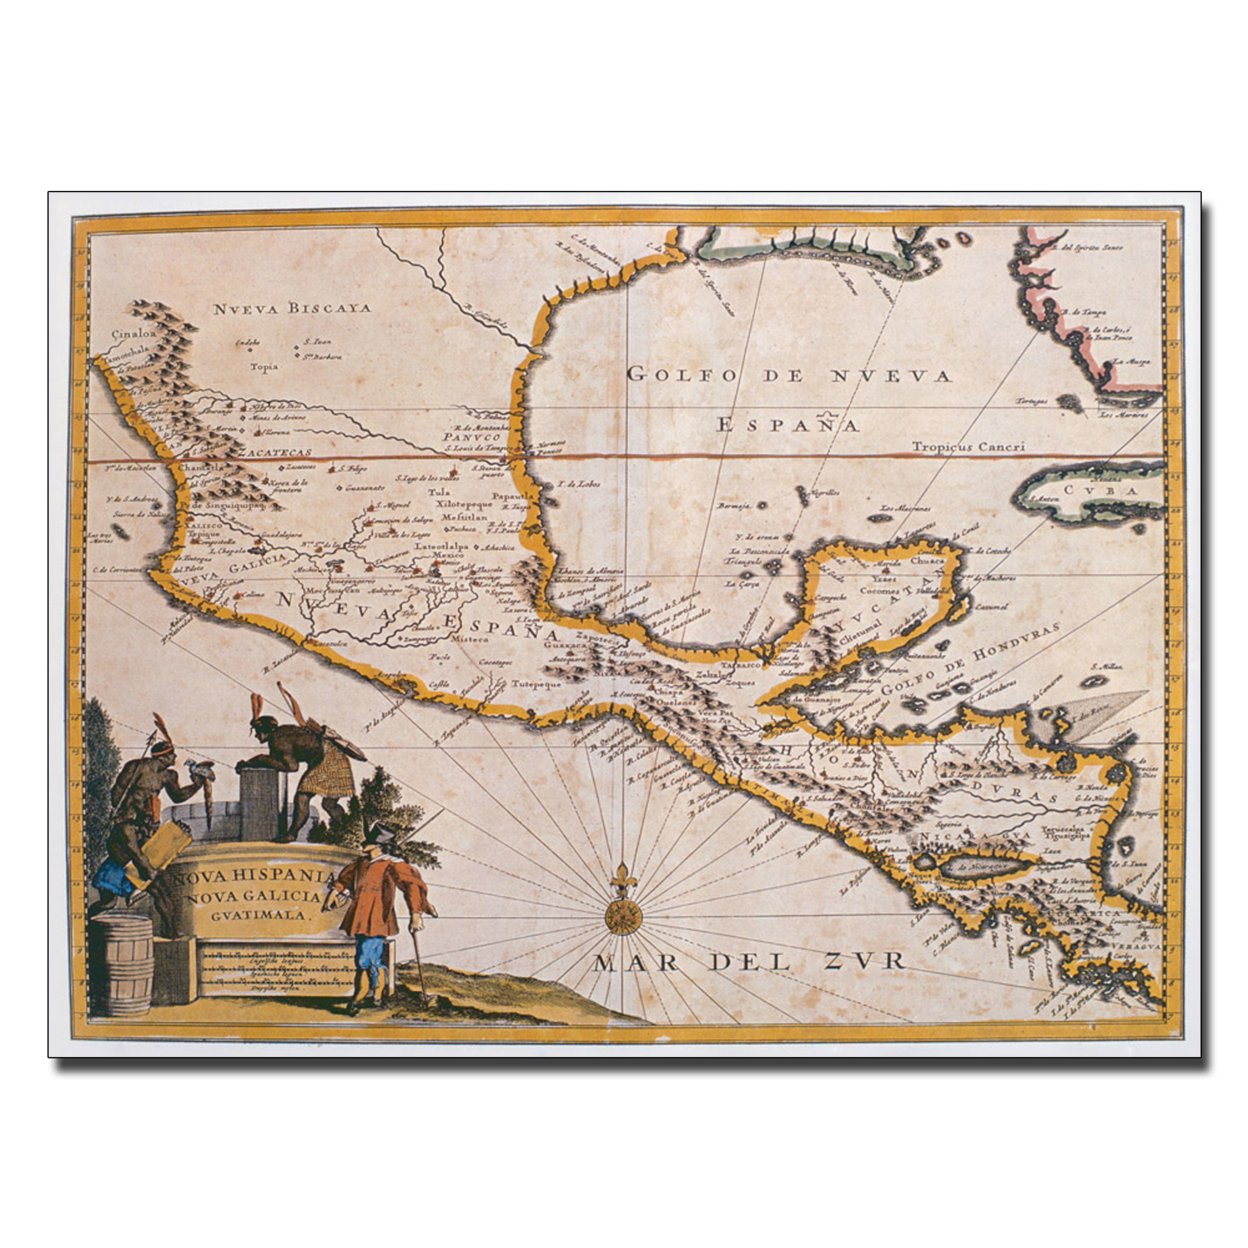 Map Of New Spain 1625' Canvas Art 18 X 24